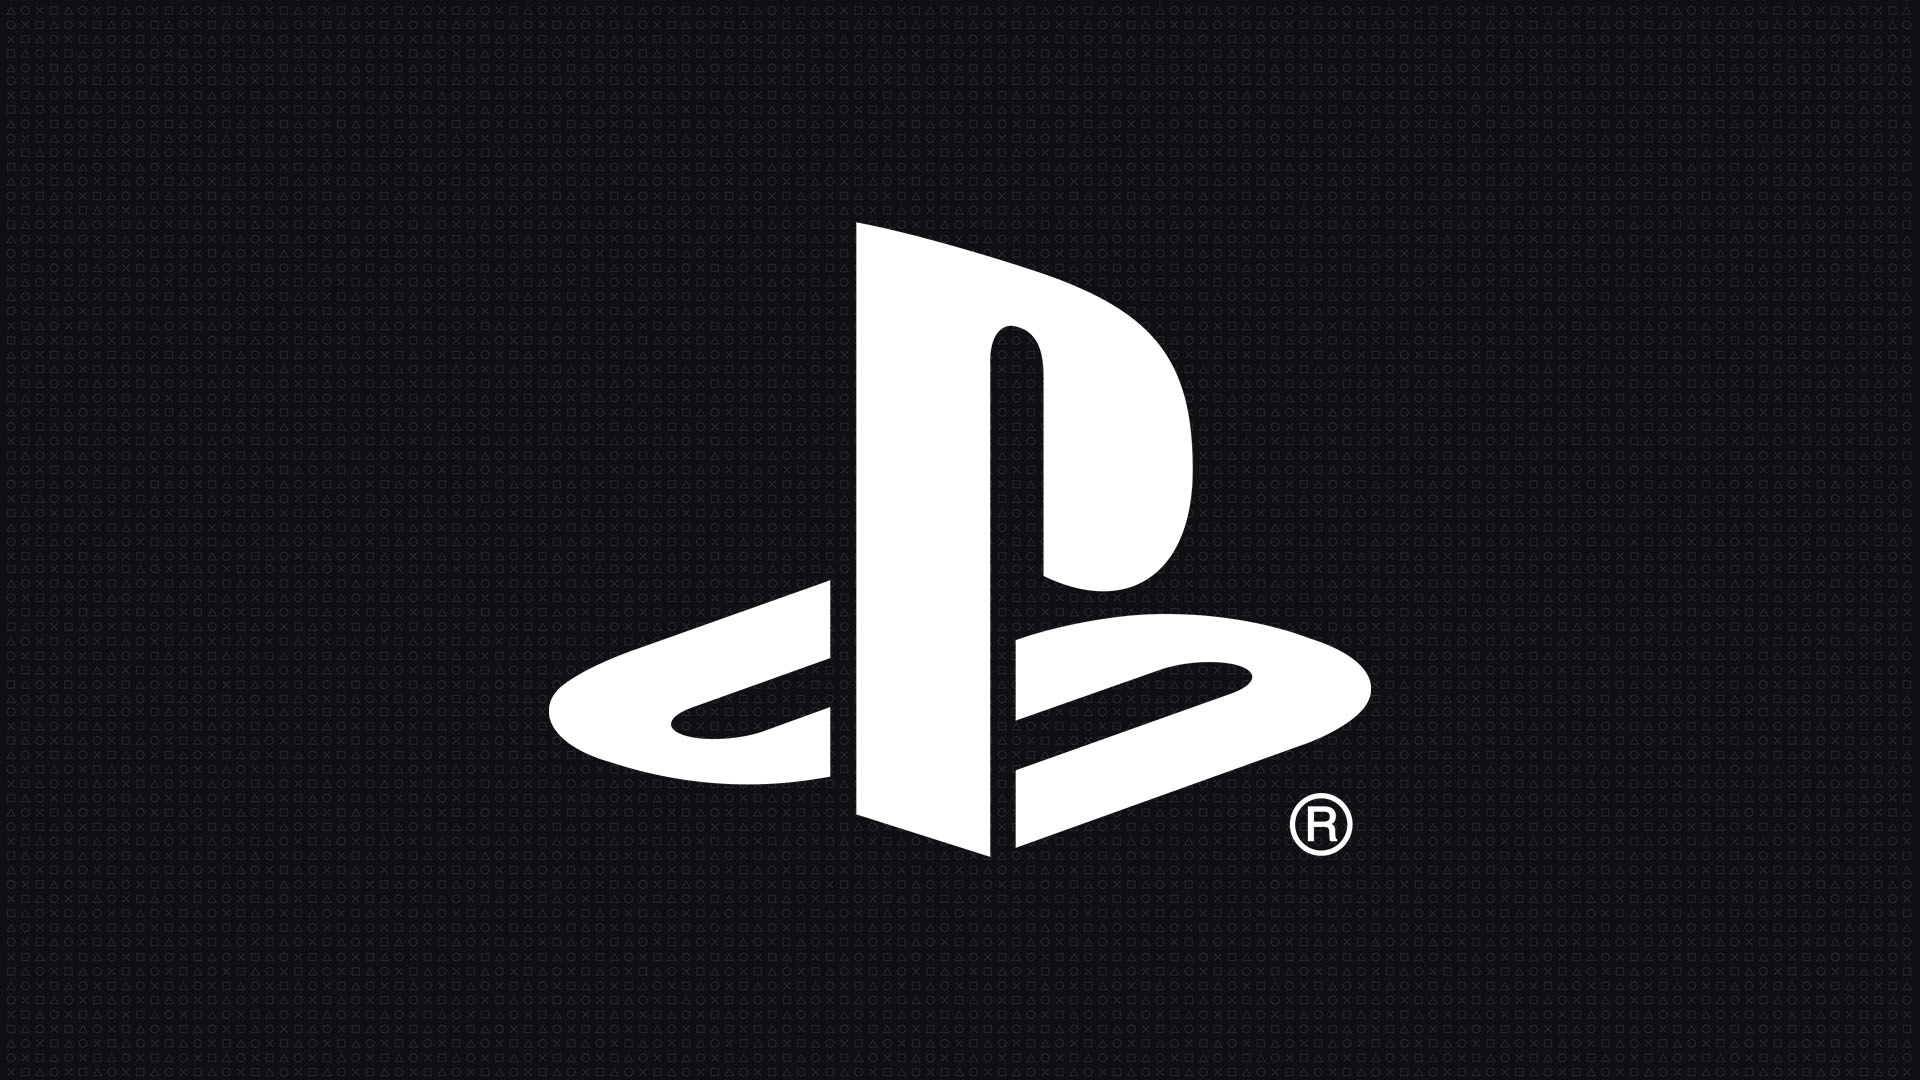 Sony Interactive Entertainment will not release “any new major existing ...